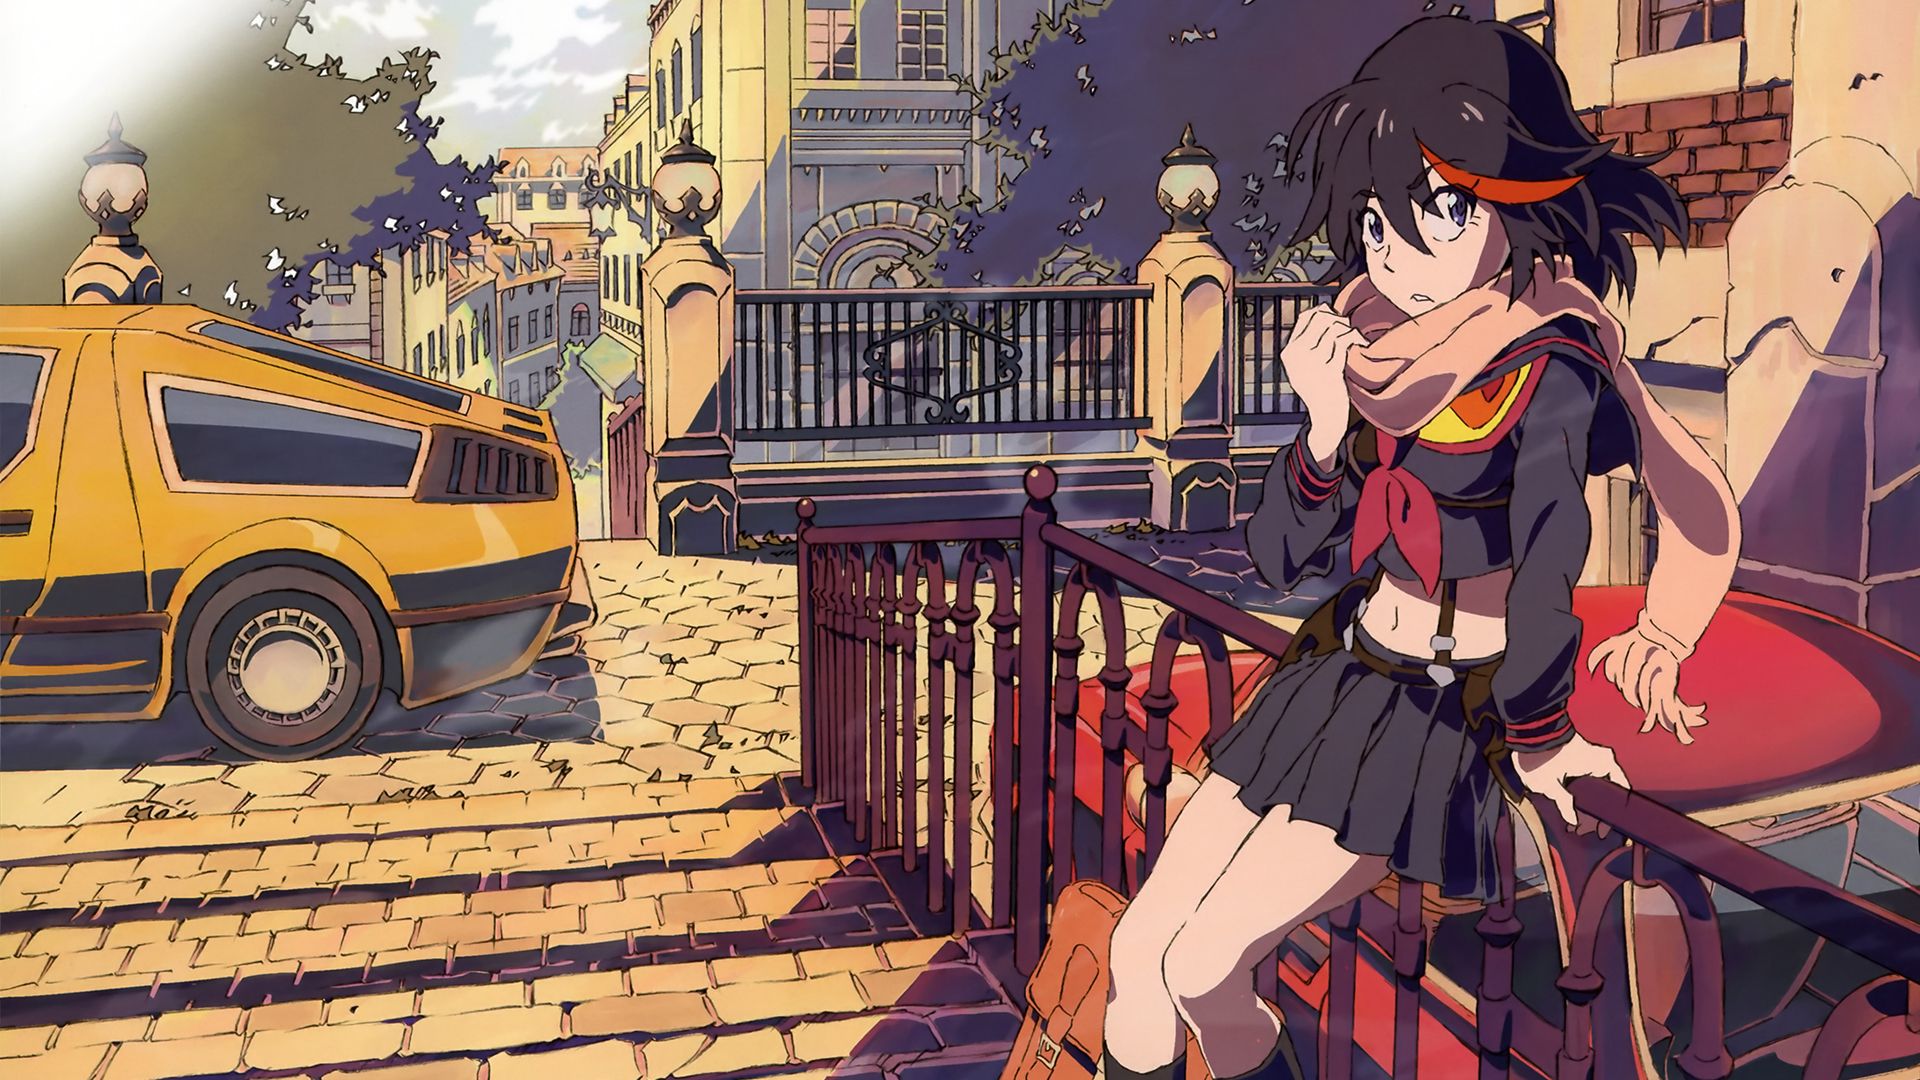 How Studio Trigger Changed The World Of Anime Forever